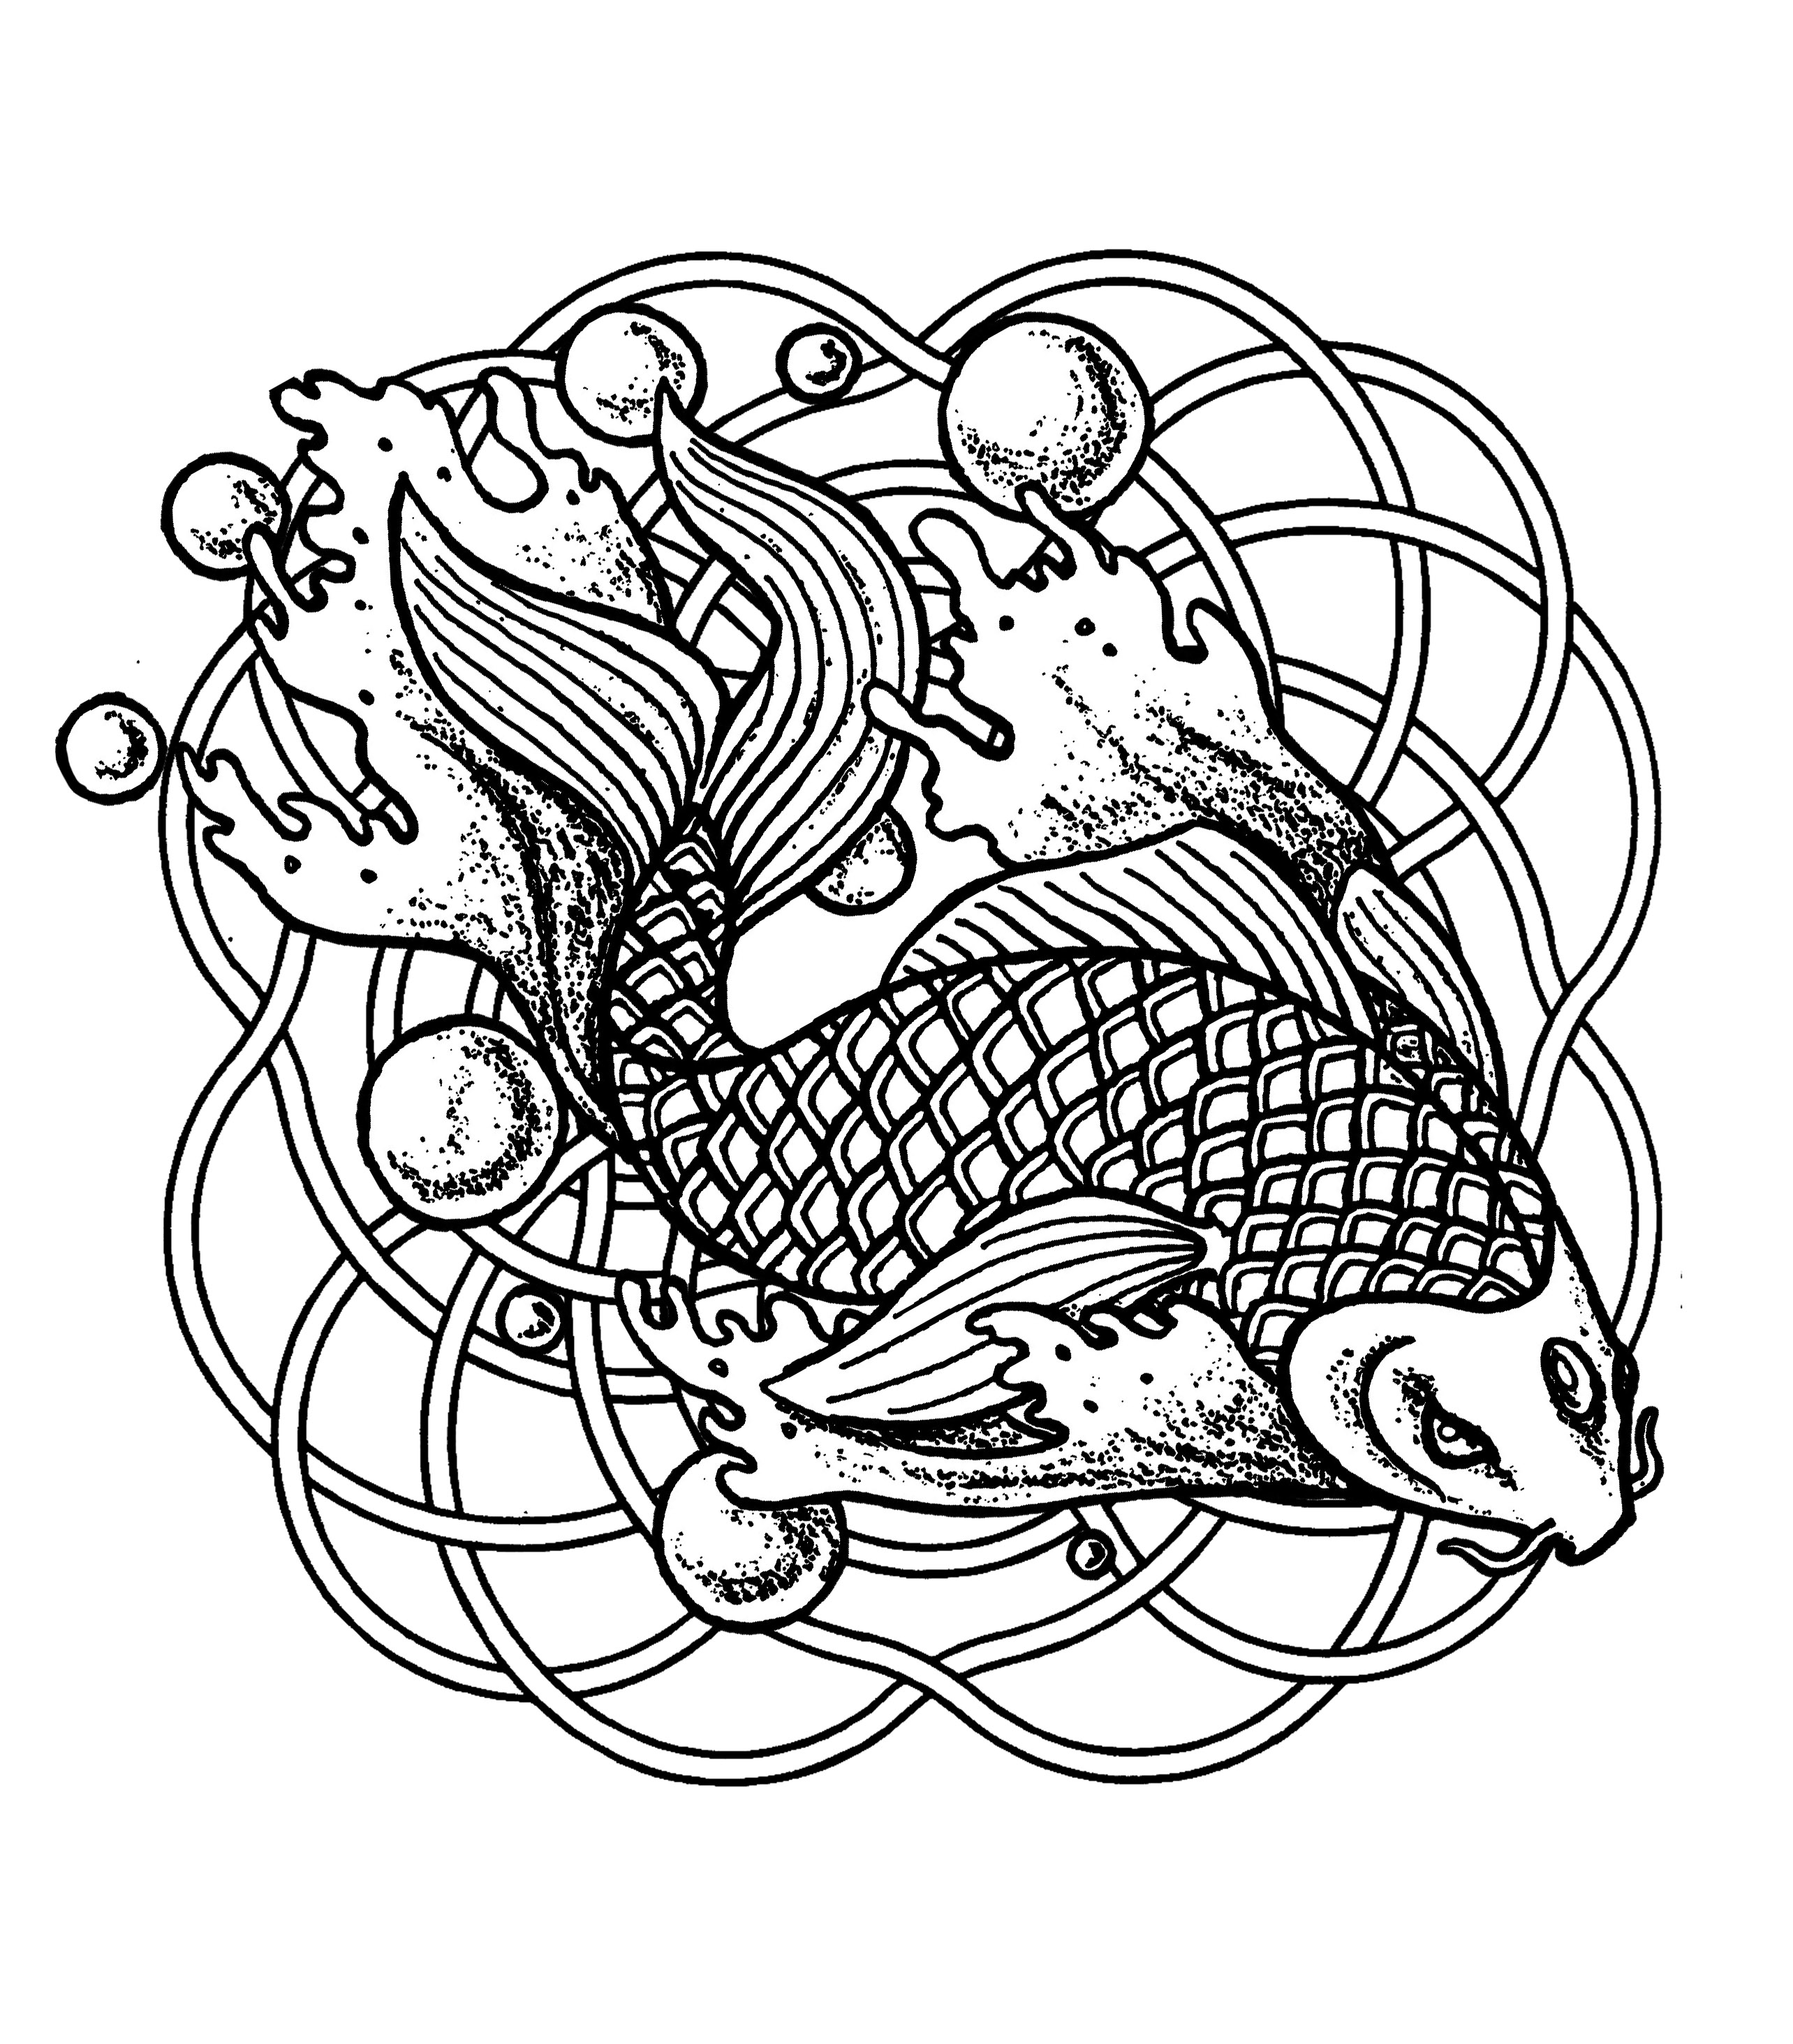 Pisces to download - Pisces Kids Coloring Pages